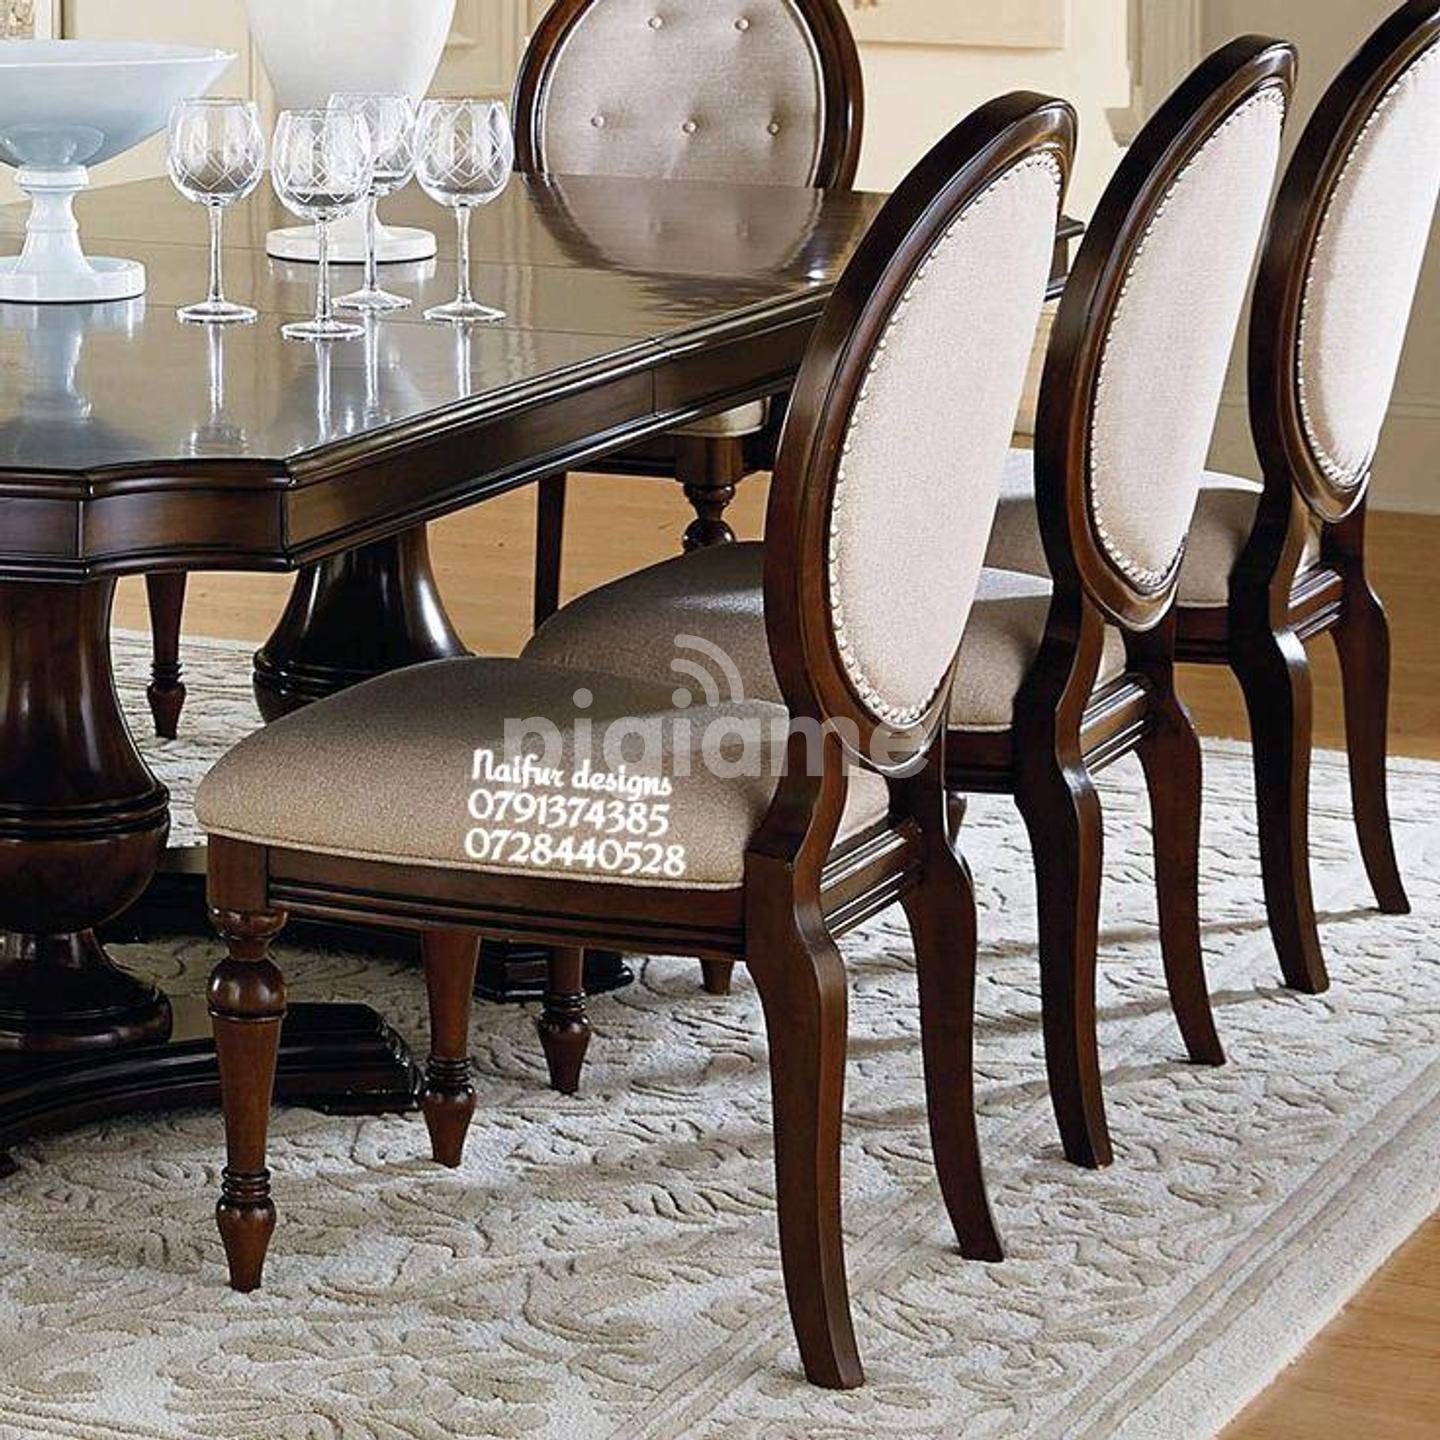 Eight Seater Dining Table Dining Sets Sale Kenya In Nairobi Pigiame